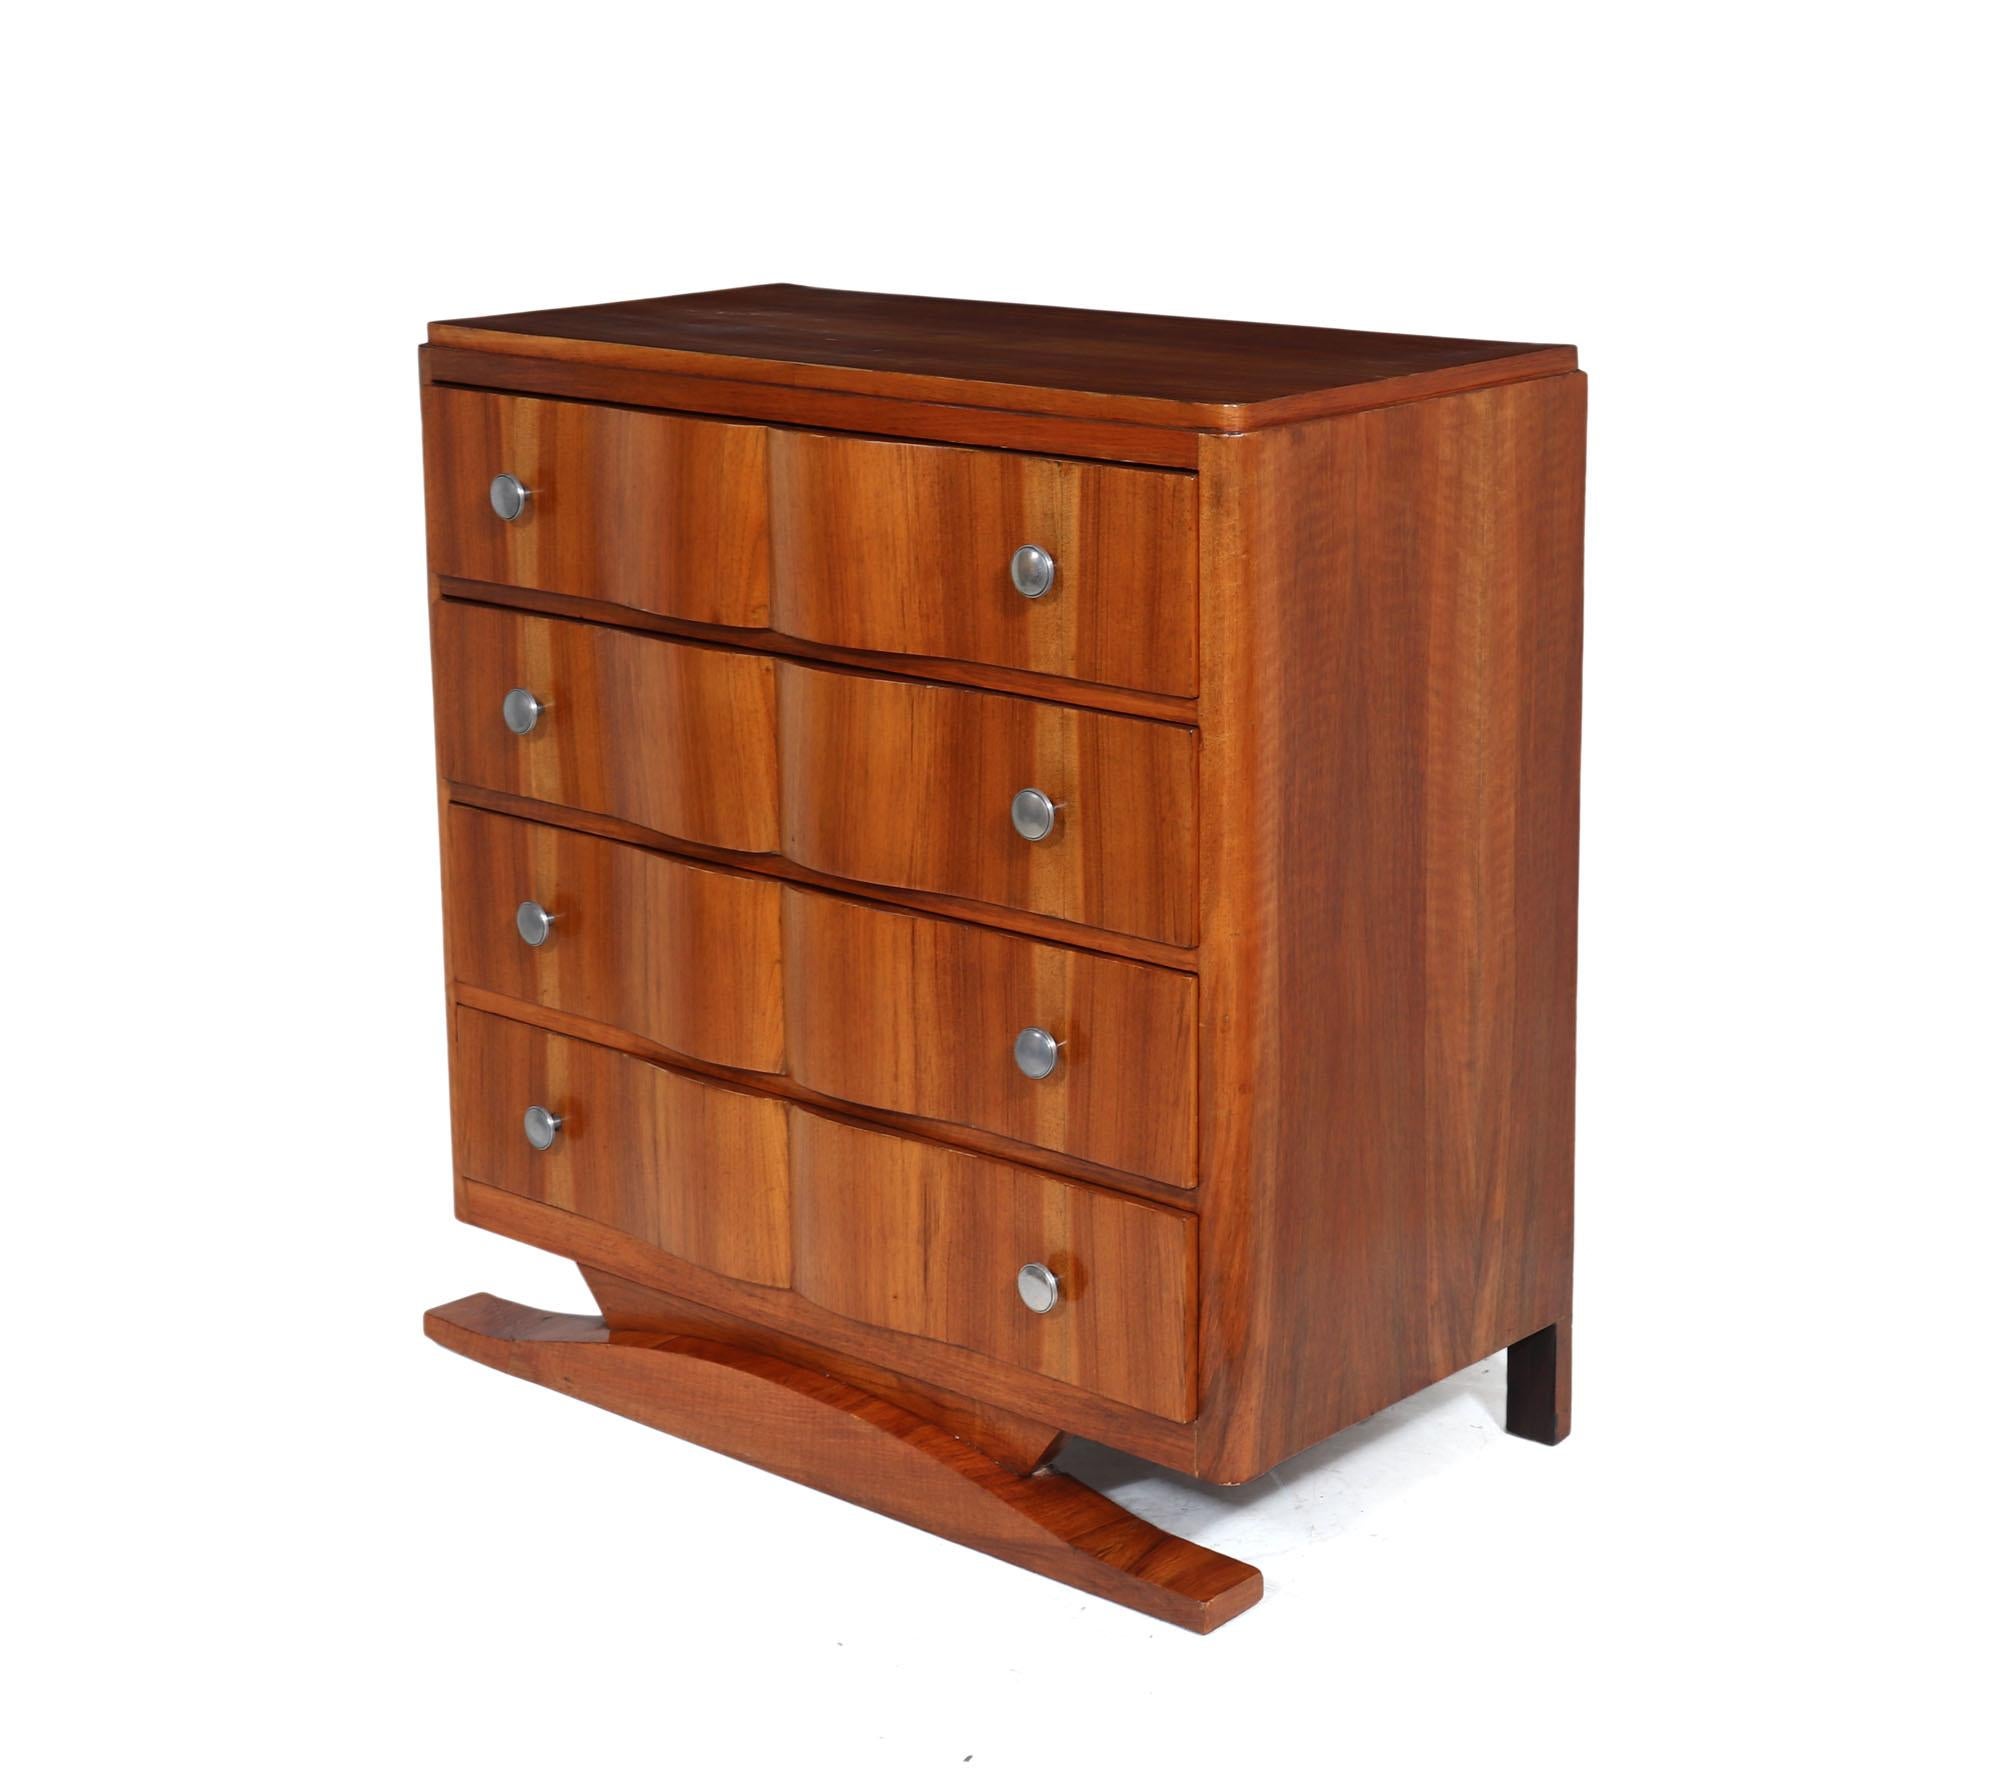 Art Deco chest of drawers
A French Art Deco Chest of drawers produced in the 1930s in walnut having four long shaped front drawers and standing on a shaped base. The chest is in very good condition and all the drawers run smoothly, it has been